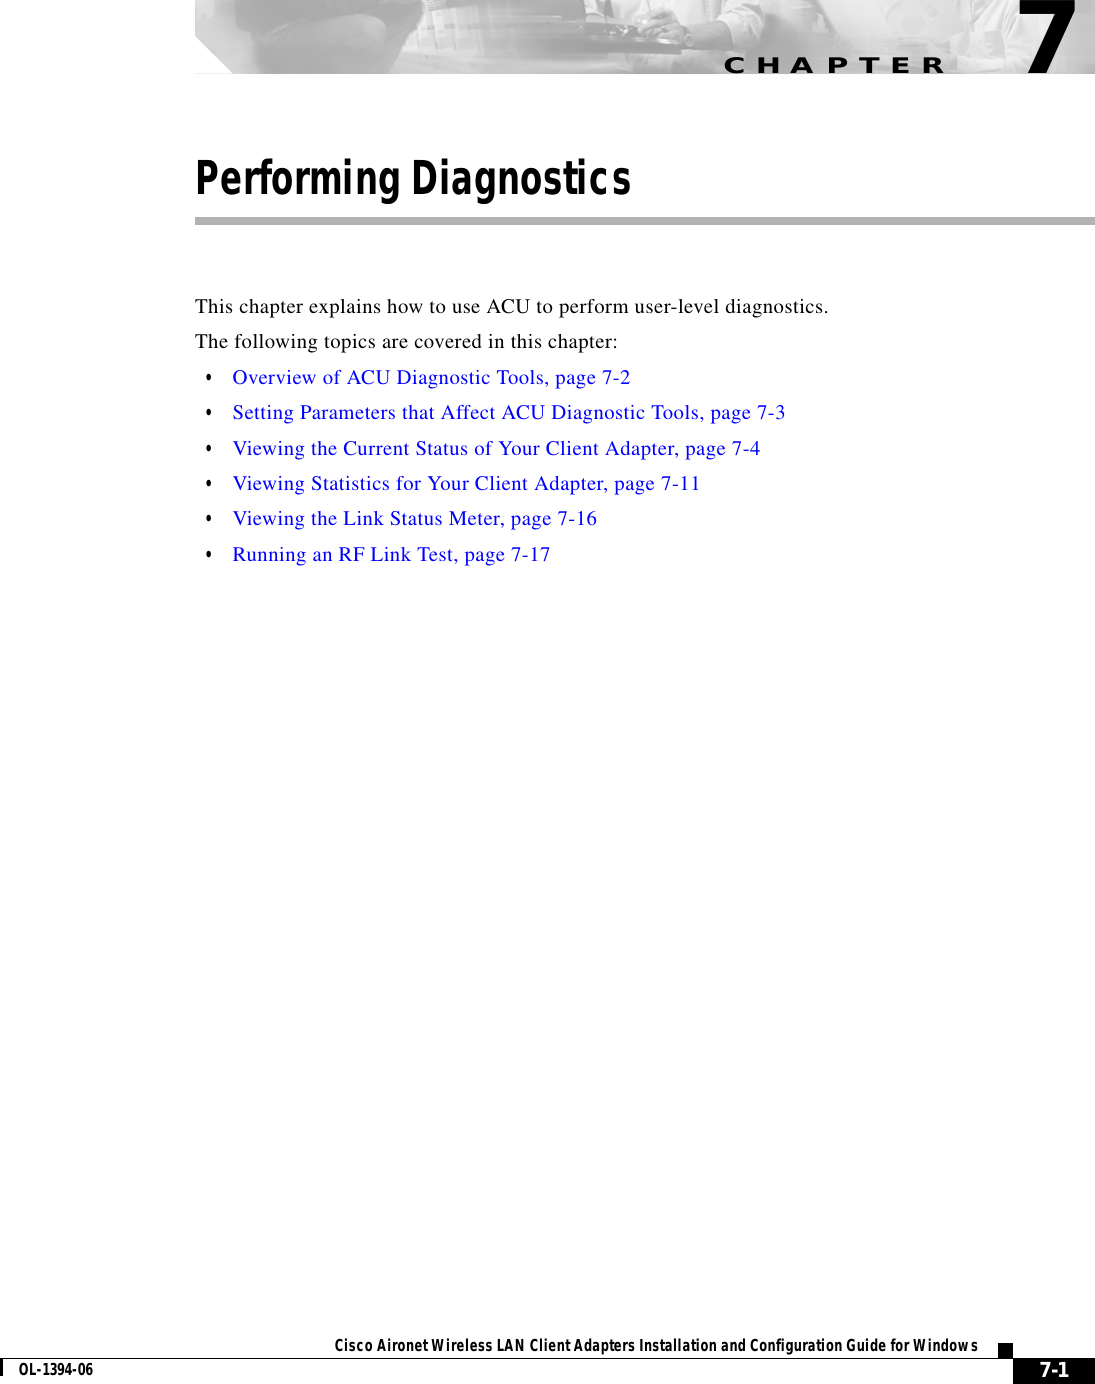 CHAPTER7-1Cisco Aironet Wireless LAN Client Adapters Installation and Configuration Guide for WindowsOL-1394-067Performing DiagnosticsThis chapter explains how to use ACU to perform user-level diagnostics.The following topics are covered in this chapter:•Overview of ACU Diagnostic Tools, page 7-2•Setting Parameters that Affect ACU Diagnostic Tools, page 7-3•Viewing the Current Status of Your Client Adapter, page 7-4•Viewing Statistics for Your Client Adapter, page 7-11•Viewing the Link Status Meter, page 7-16•Running an RF Link Test, page 7-17